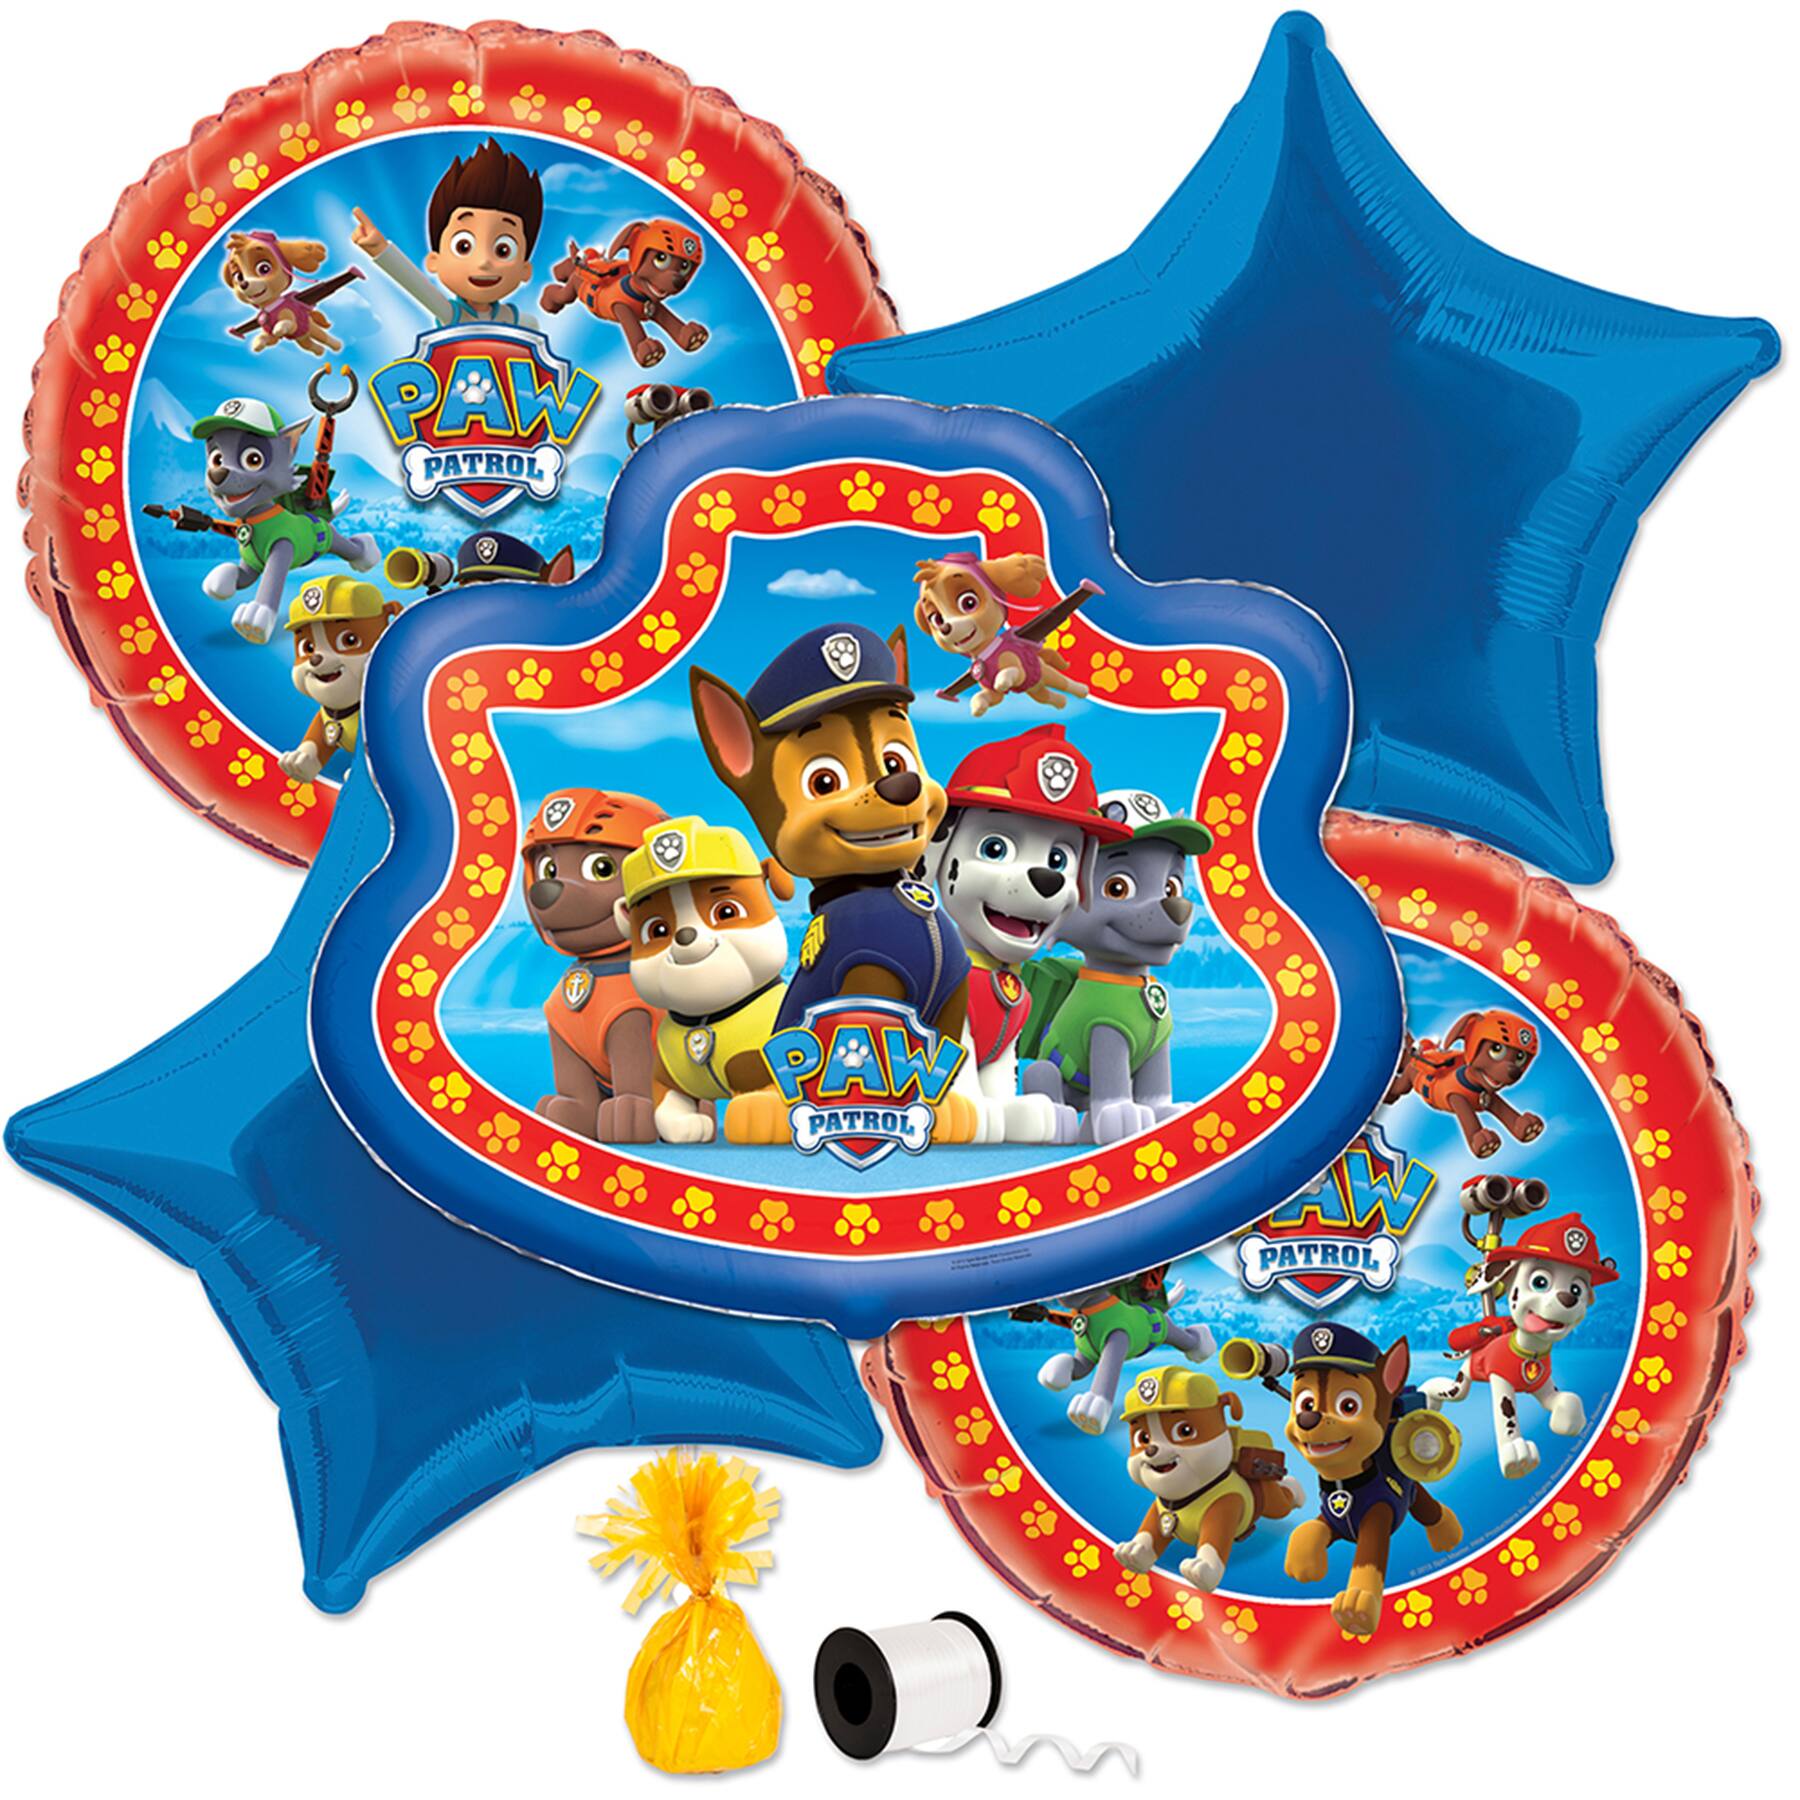 Paw Patrol Stickers x 18 Foil Design Favours Birthday -Marshall/Chase/Skye 